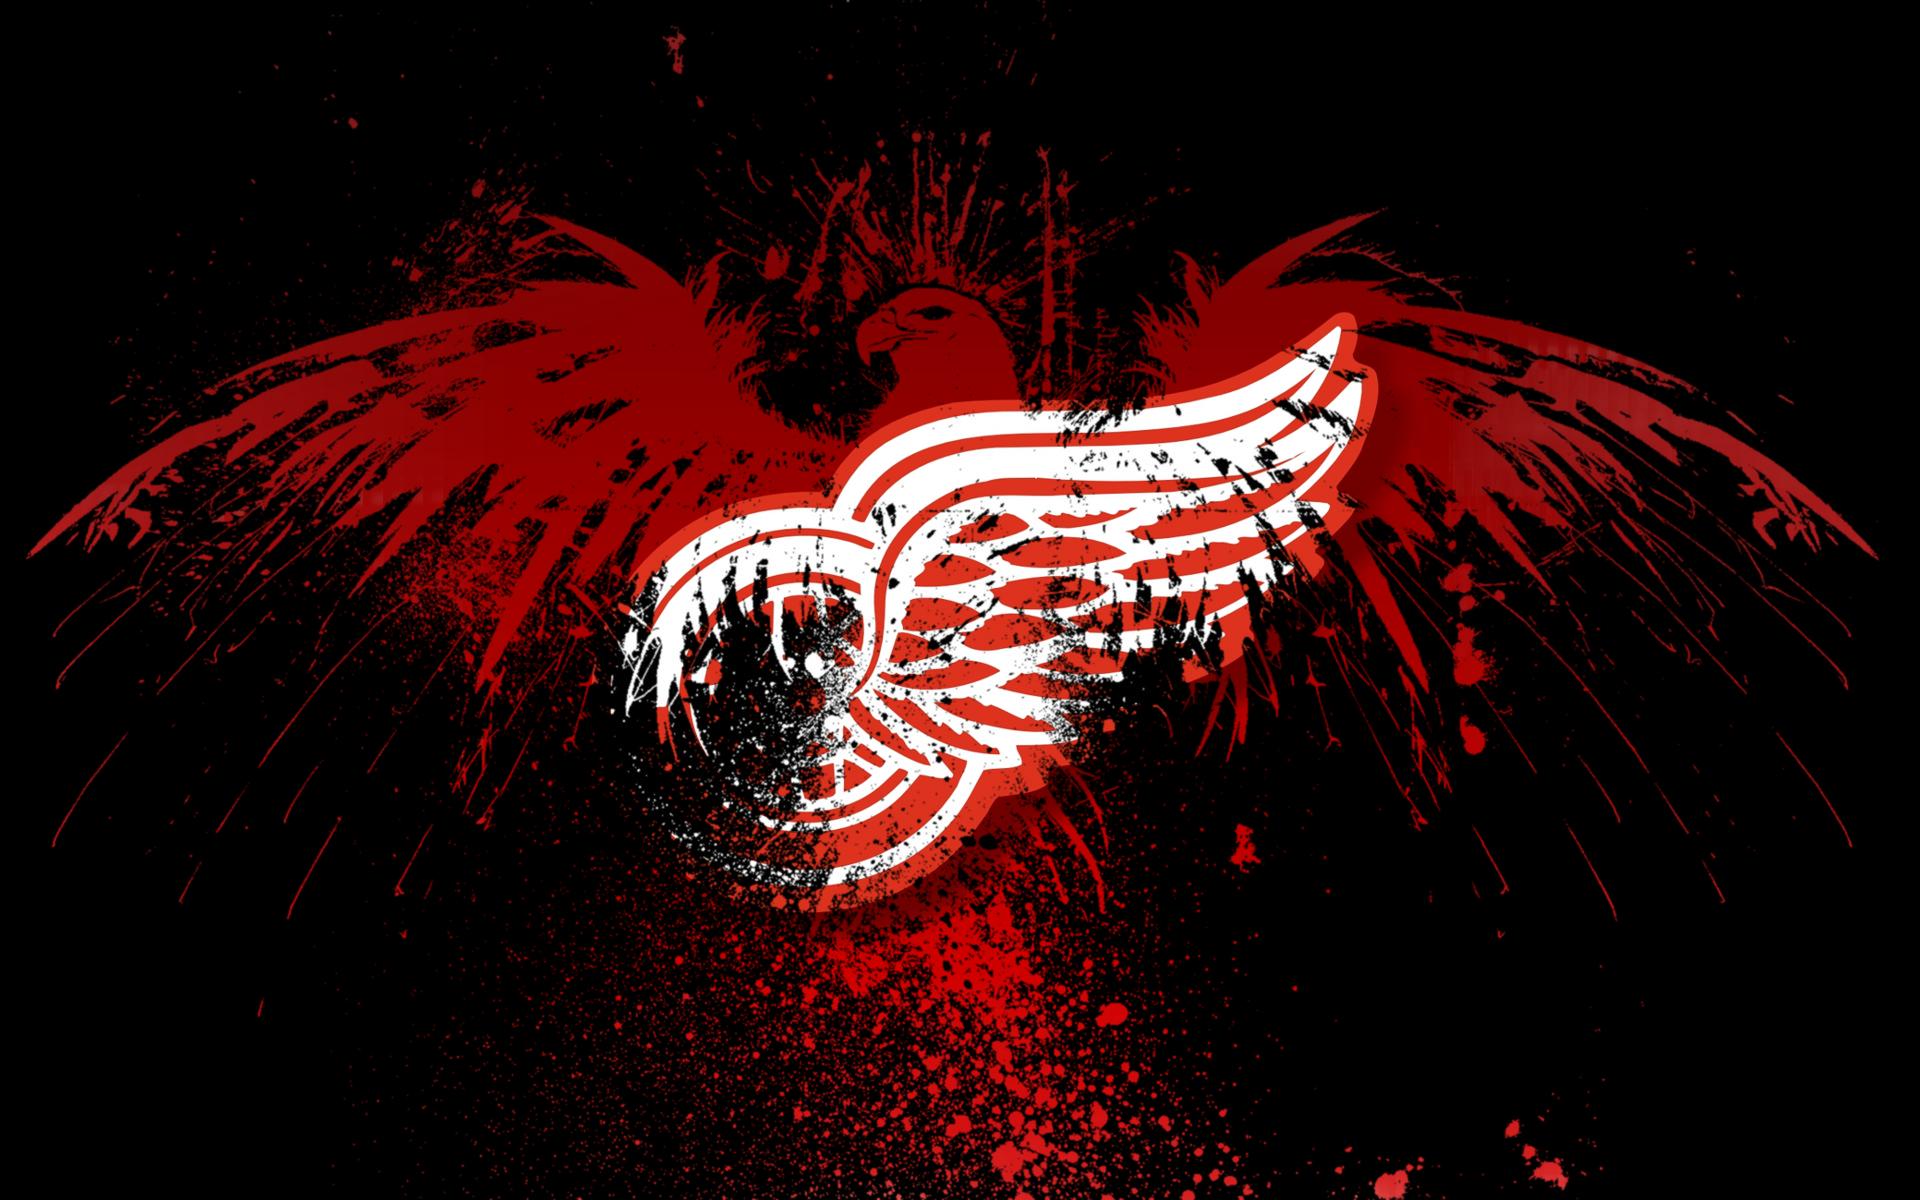 Detroit Red Wings Wallpapers - Wallpaper Cave